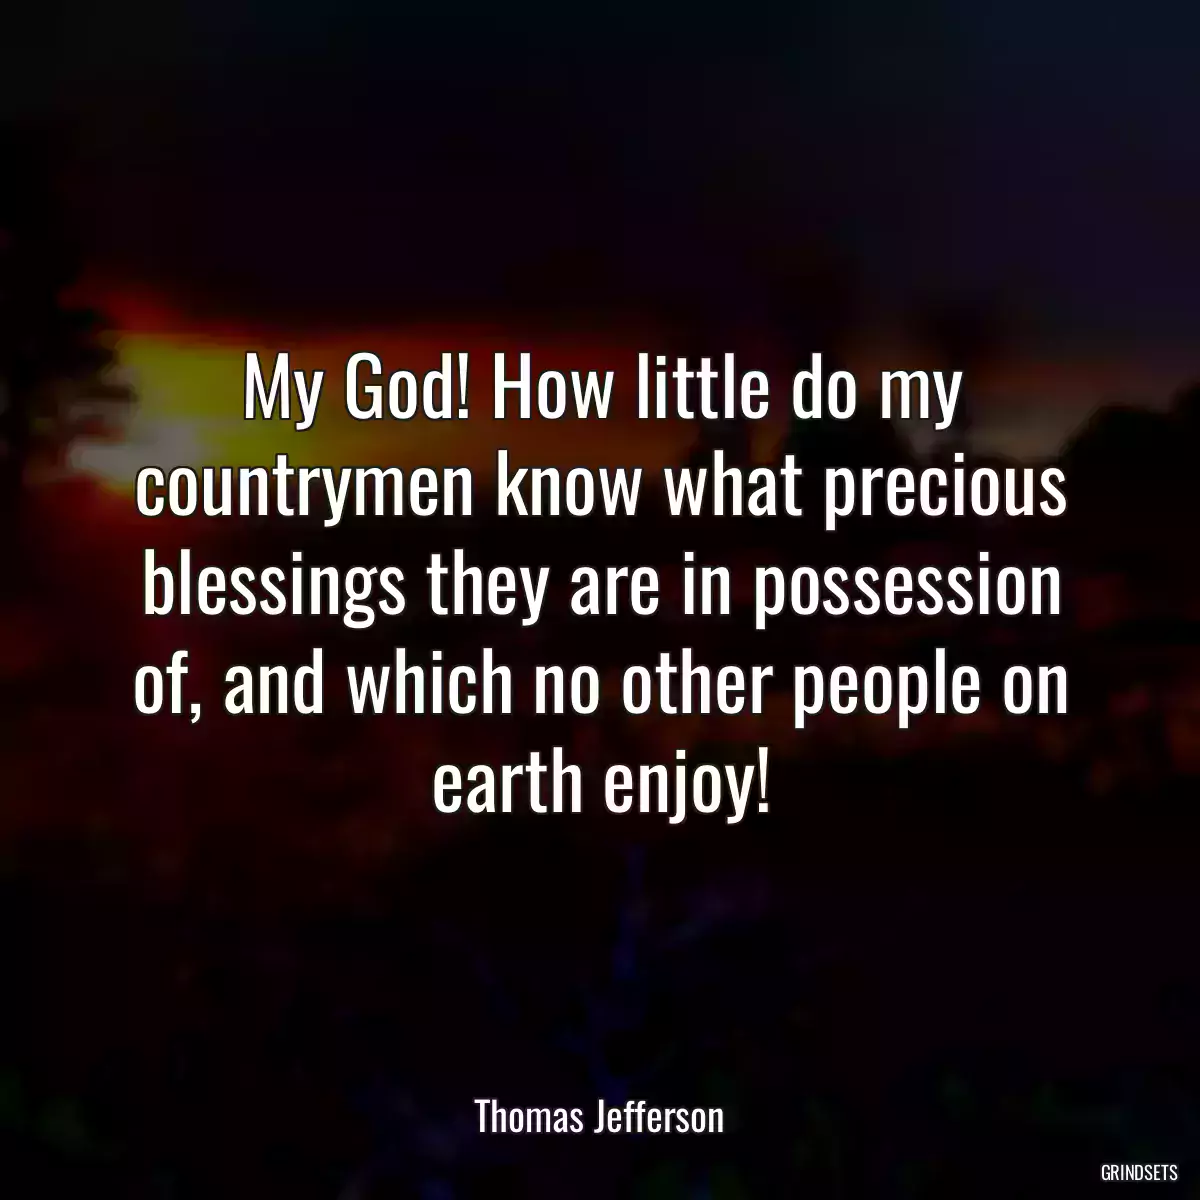 My God! How little do my countrymen know what precious blessings they are in possession of, and which no other people on earth enjoy!